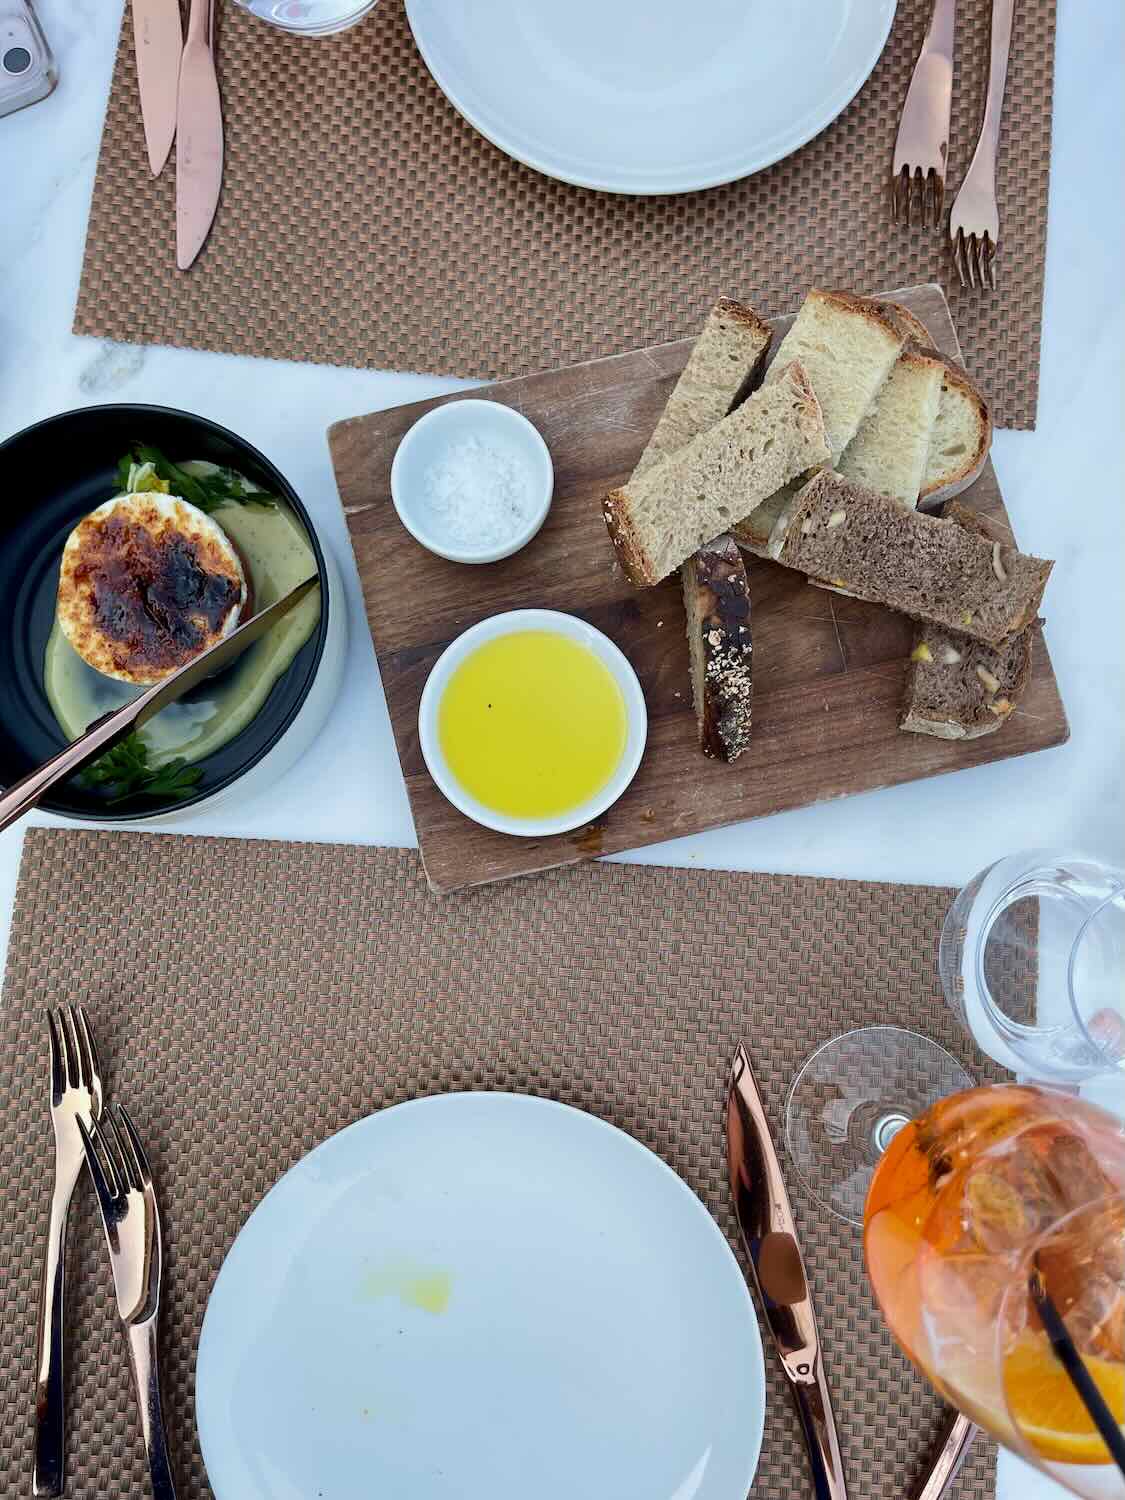 A table setting with plates, cutlery, and a wooden board featuring slices of bread, a bowl of olive oil, and a small dish of salt. A dish with melted cheese and a glass of orange-colored drink are also visible.